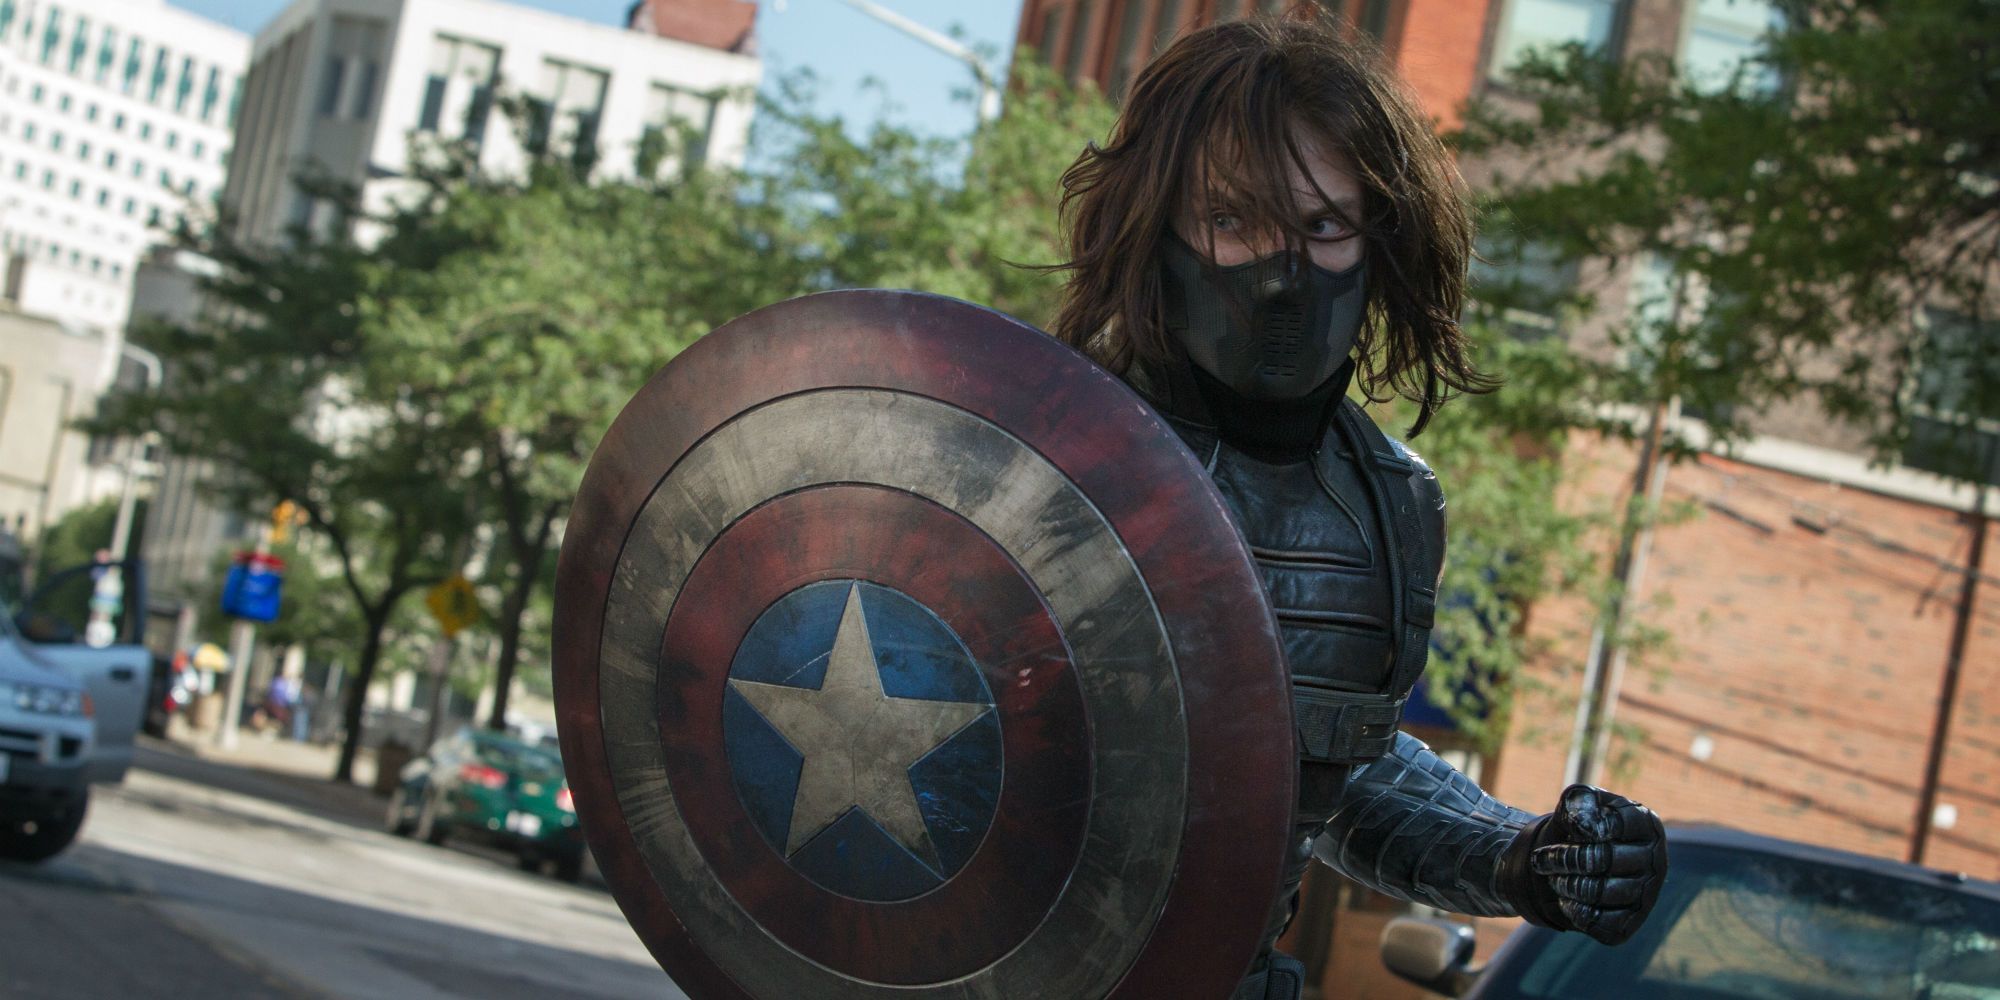 Winter Soldier holding Captain America's shield